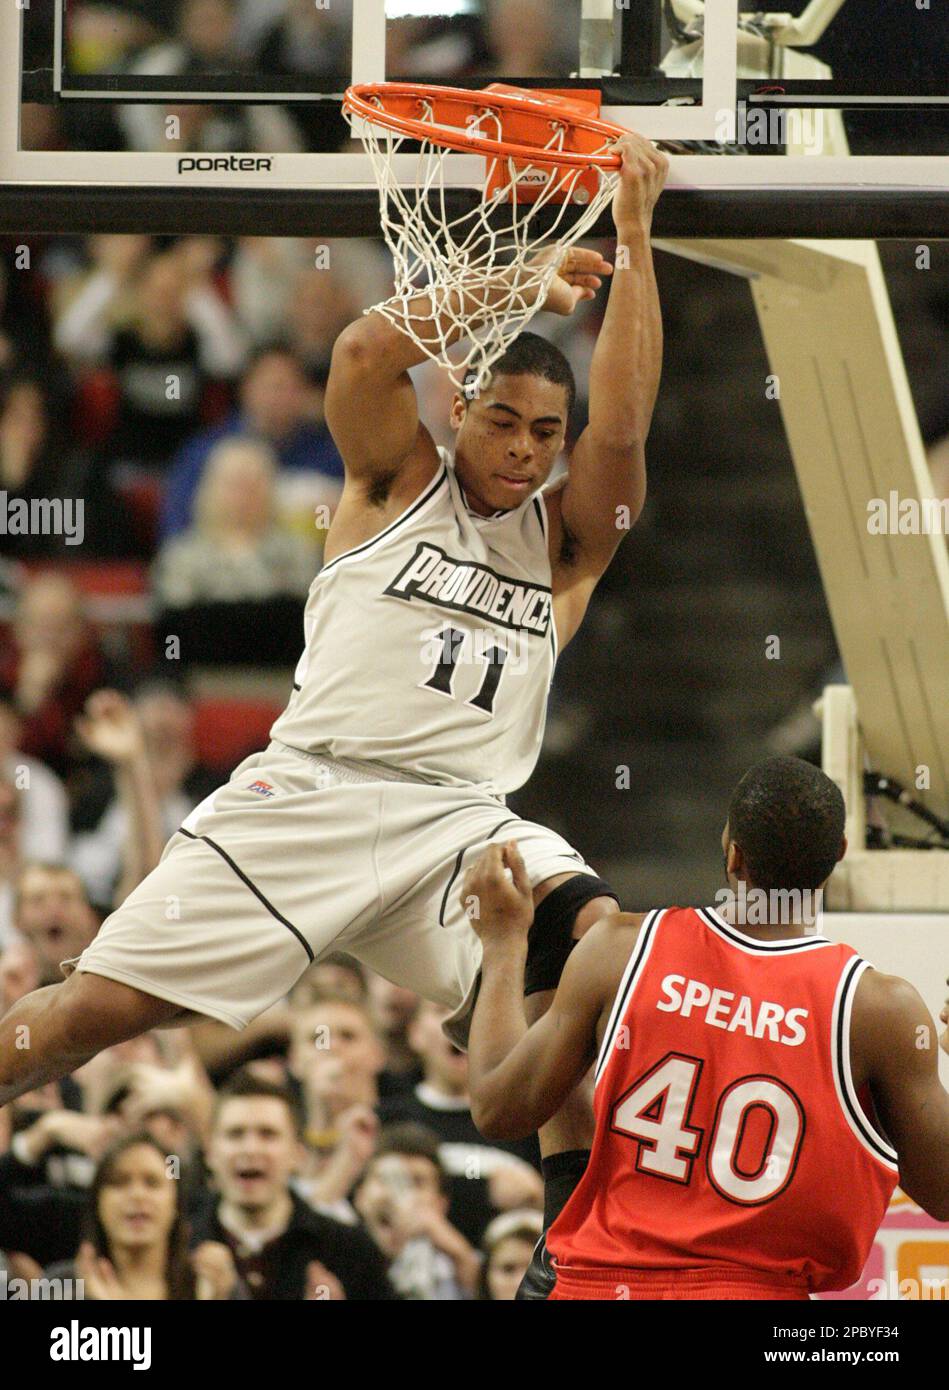 Providence's Geoffrey McDermott (11) hangs on the rim following a slam dunk  as St. John's Aaron Spears (40) looks on during a basketball game Saturday,  Feb. 17, 2007, in Providence, R.I. Providence